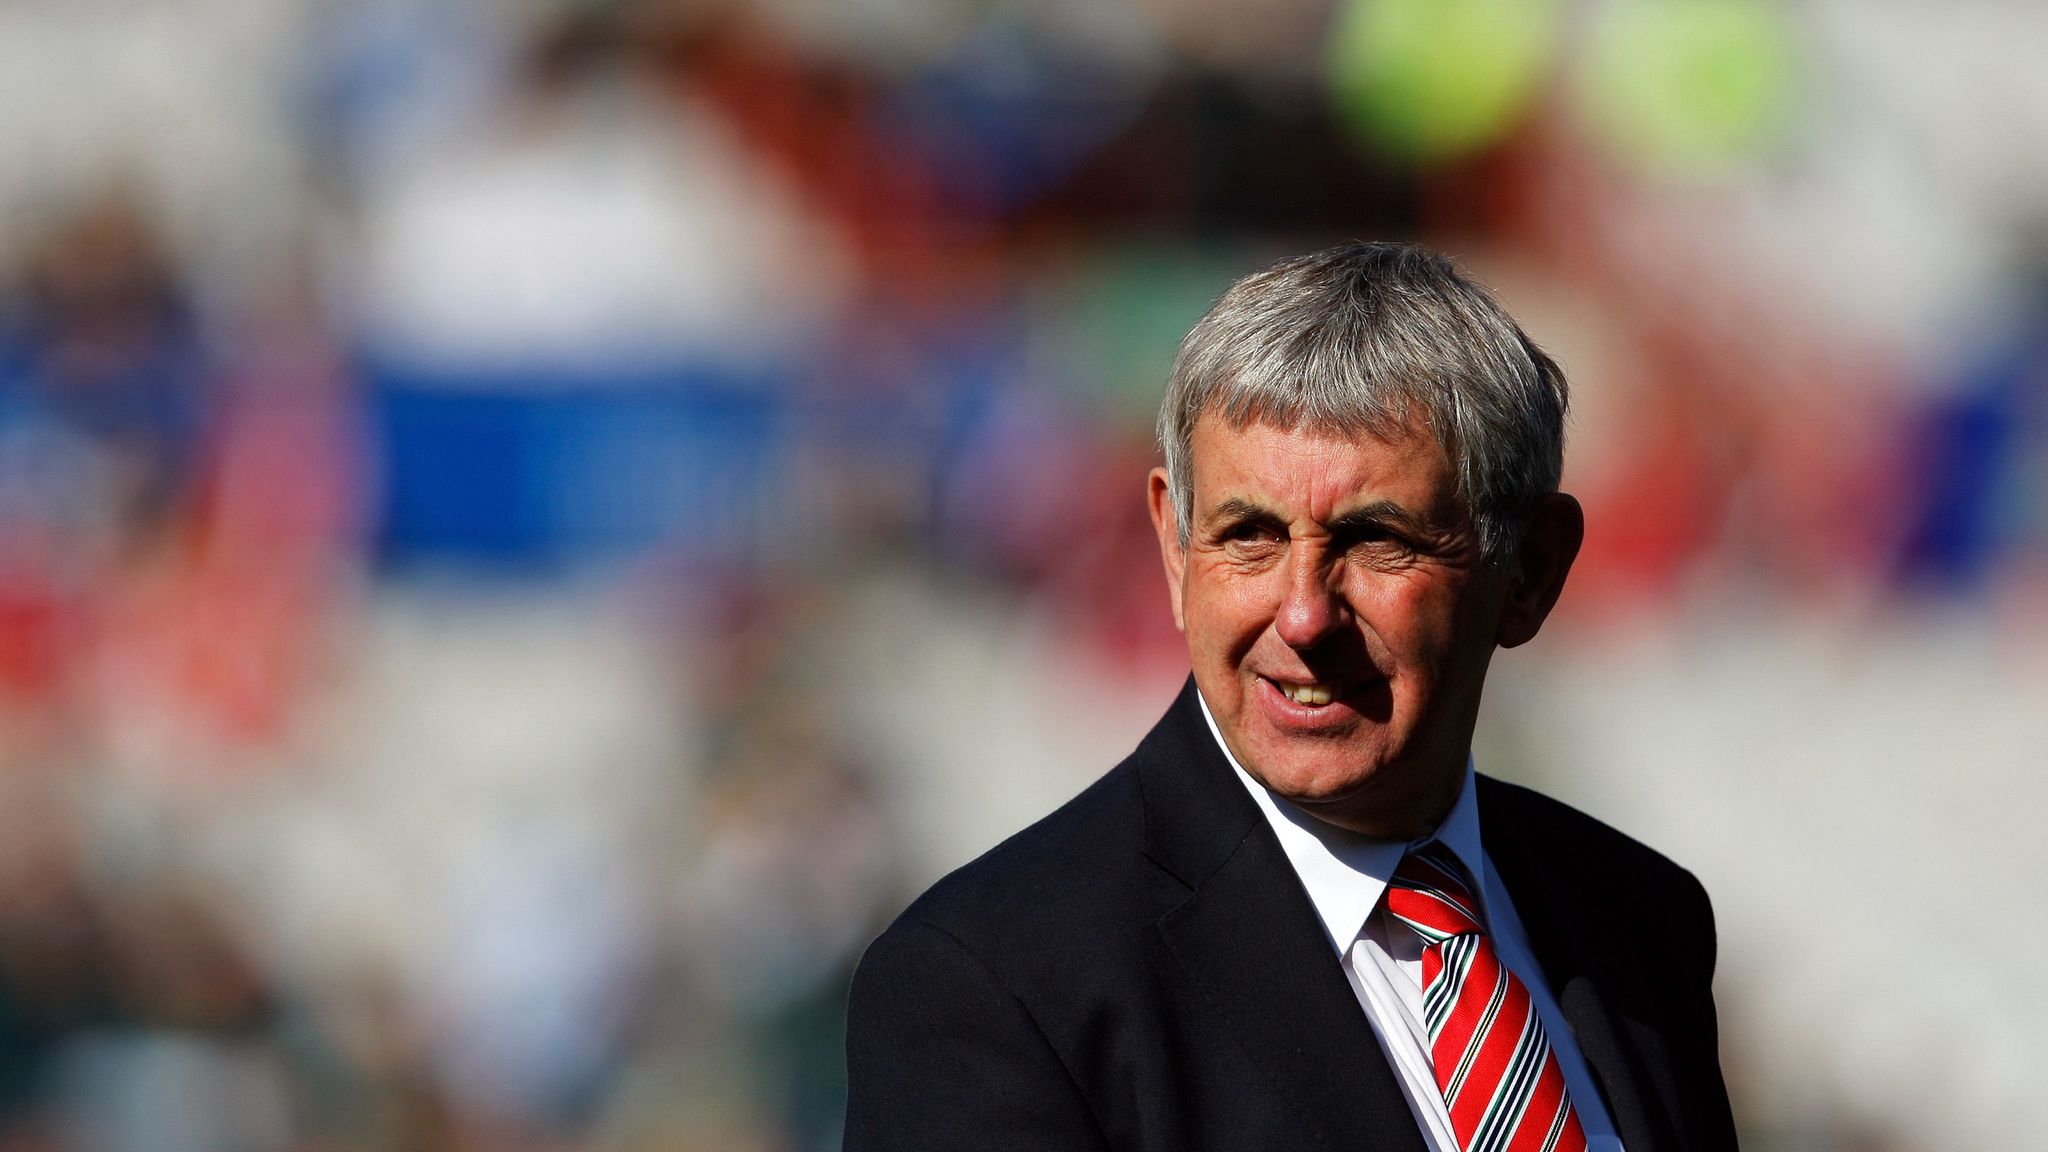 Players still value Lions jersey, says Sir Ian McGeechan as Premiership  season extension threatens future tours | Rugby Union News | Sky Sports